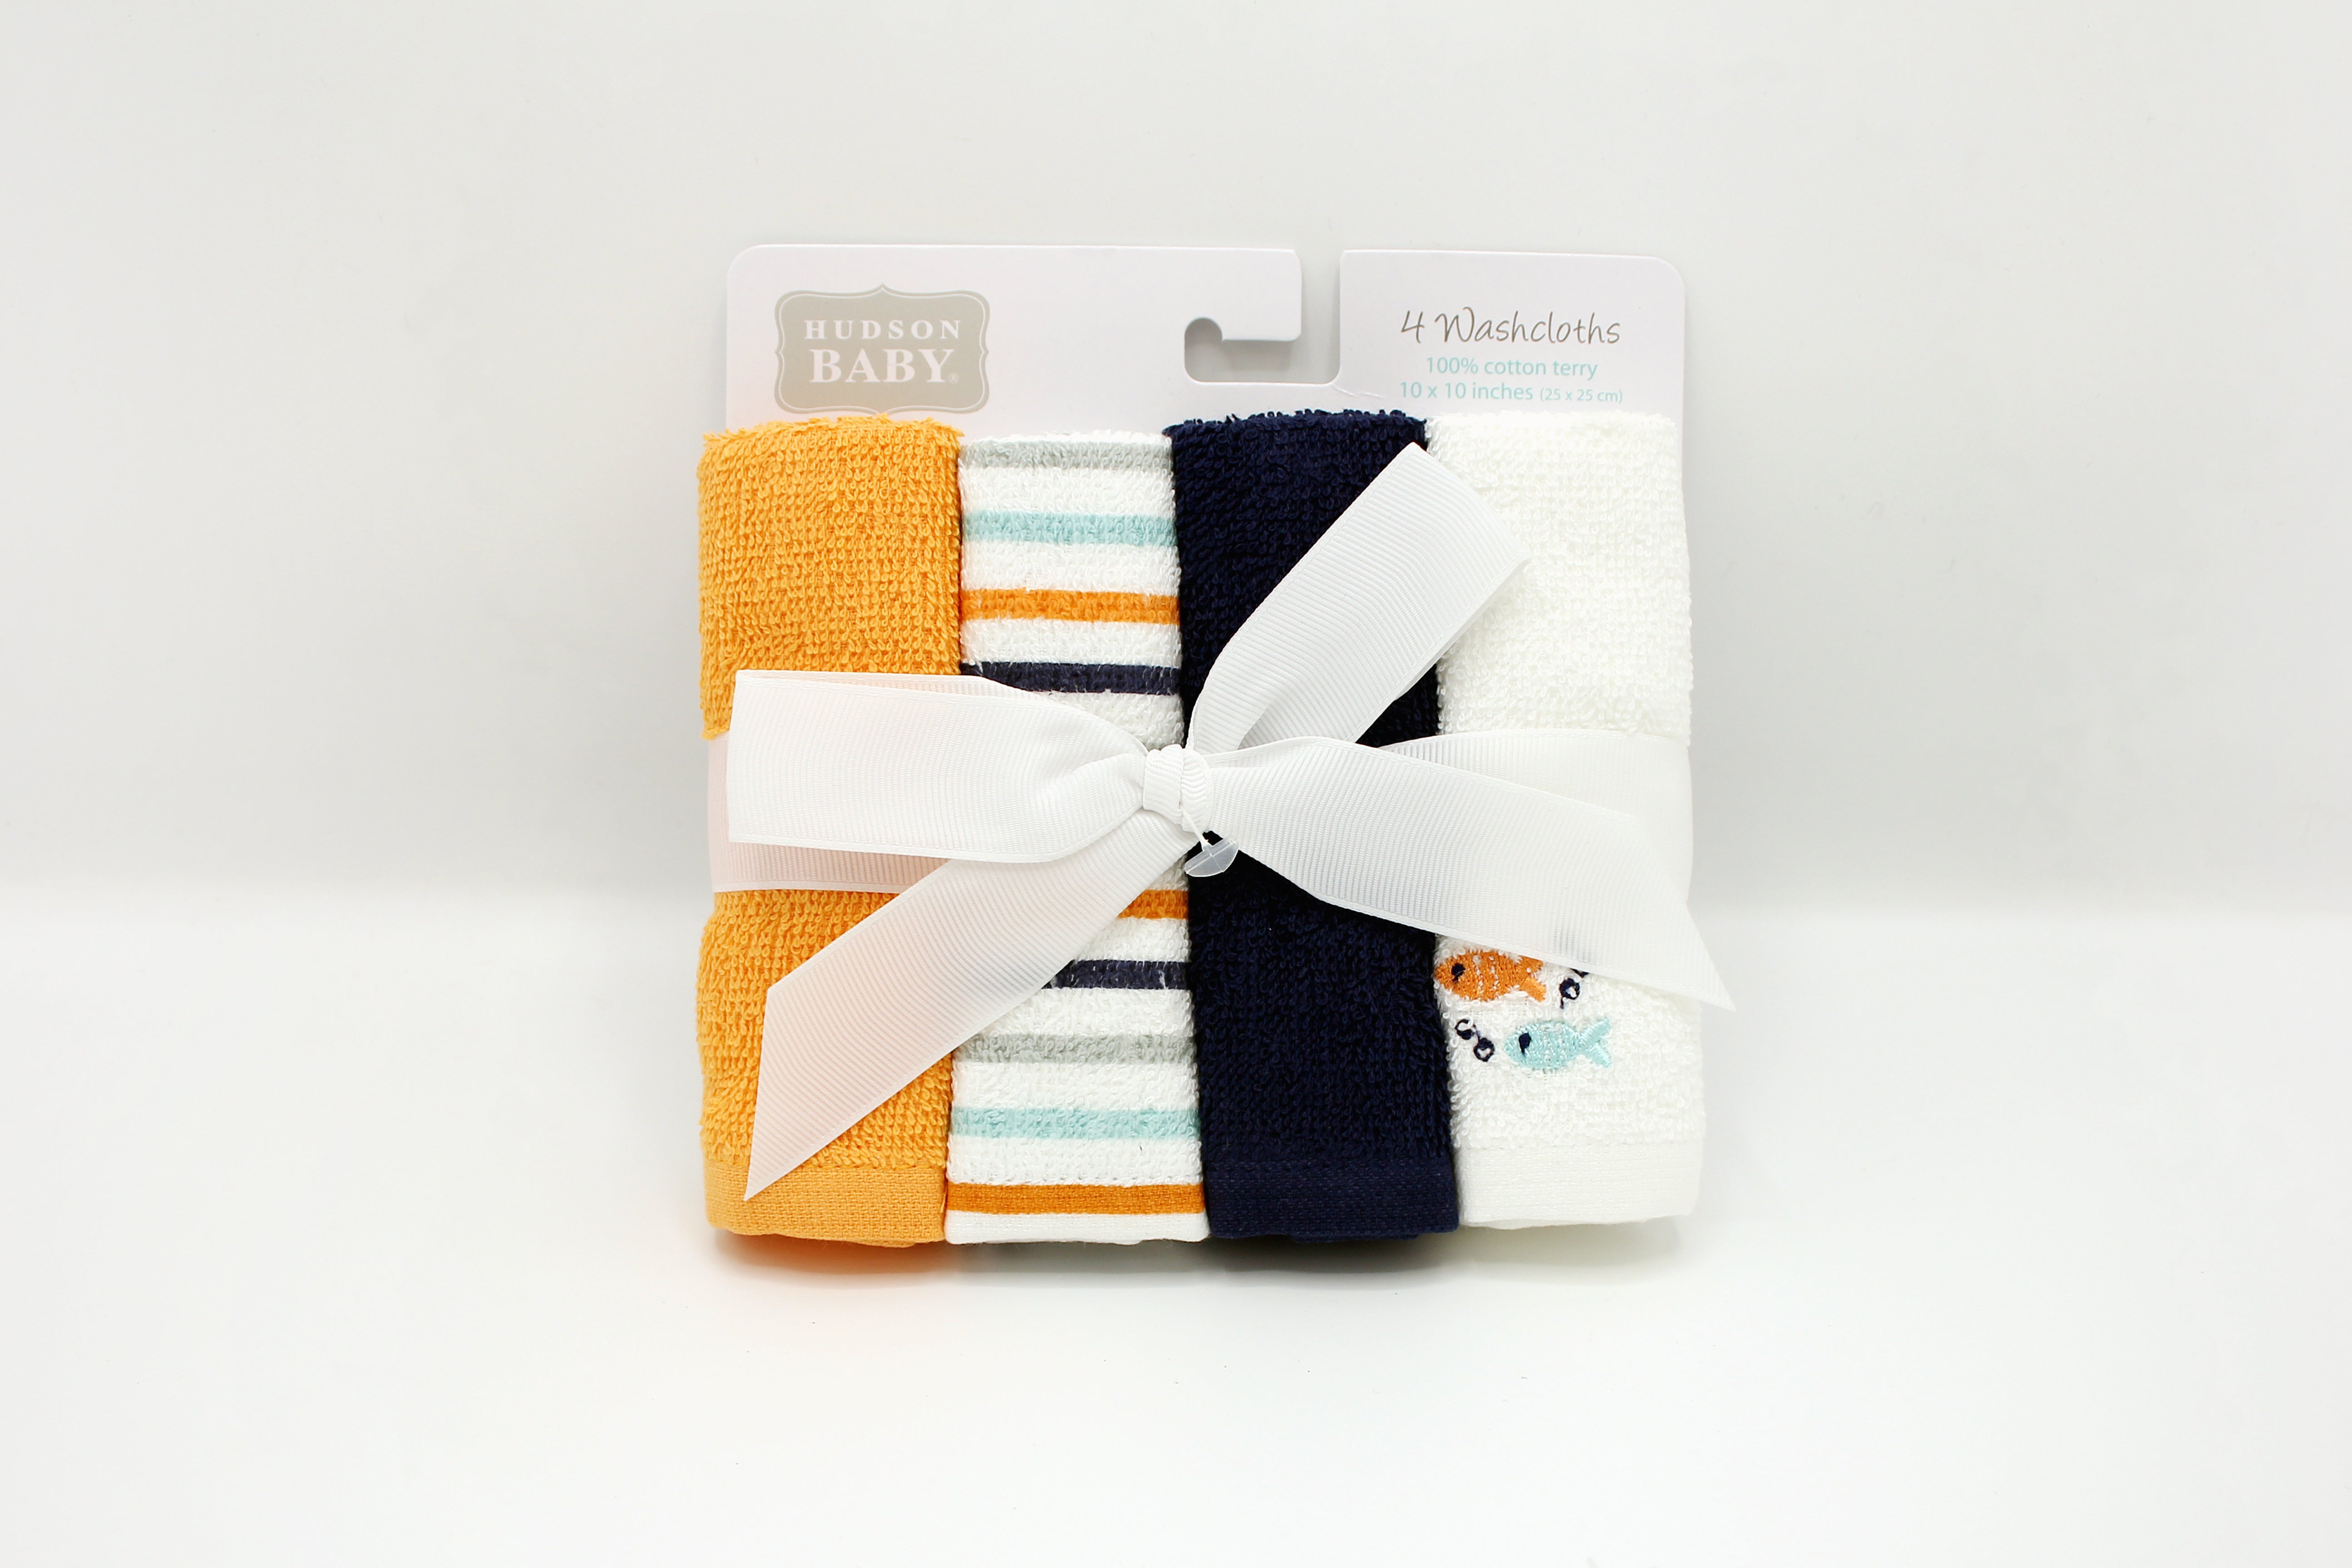 BABY FACE TOWEL PACK 4 - 28991